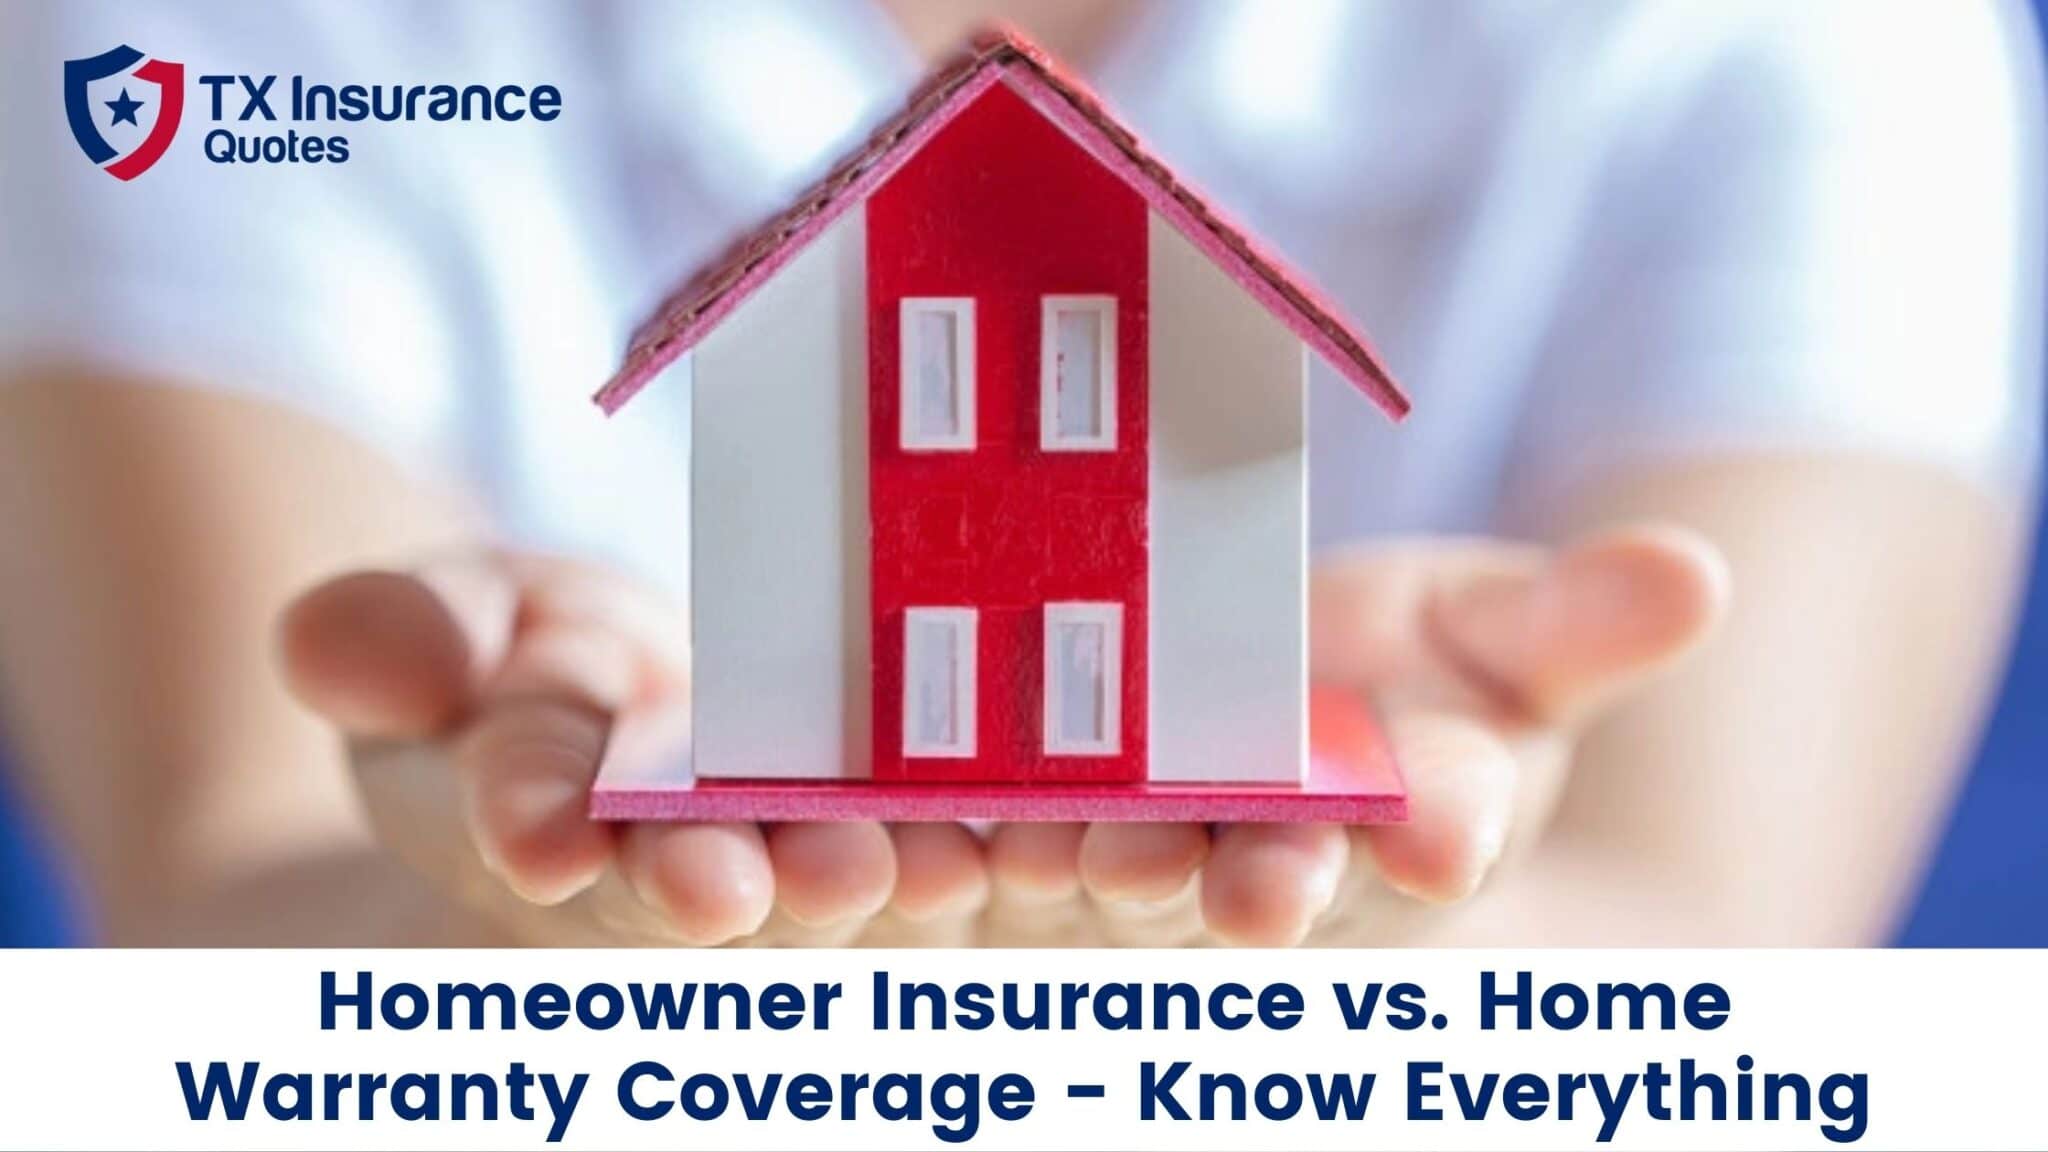 Homeowner Insurance vs. Home Warranty Coverage - Know Everything-ce9dcc9f